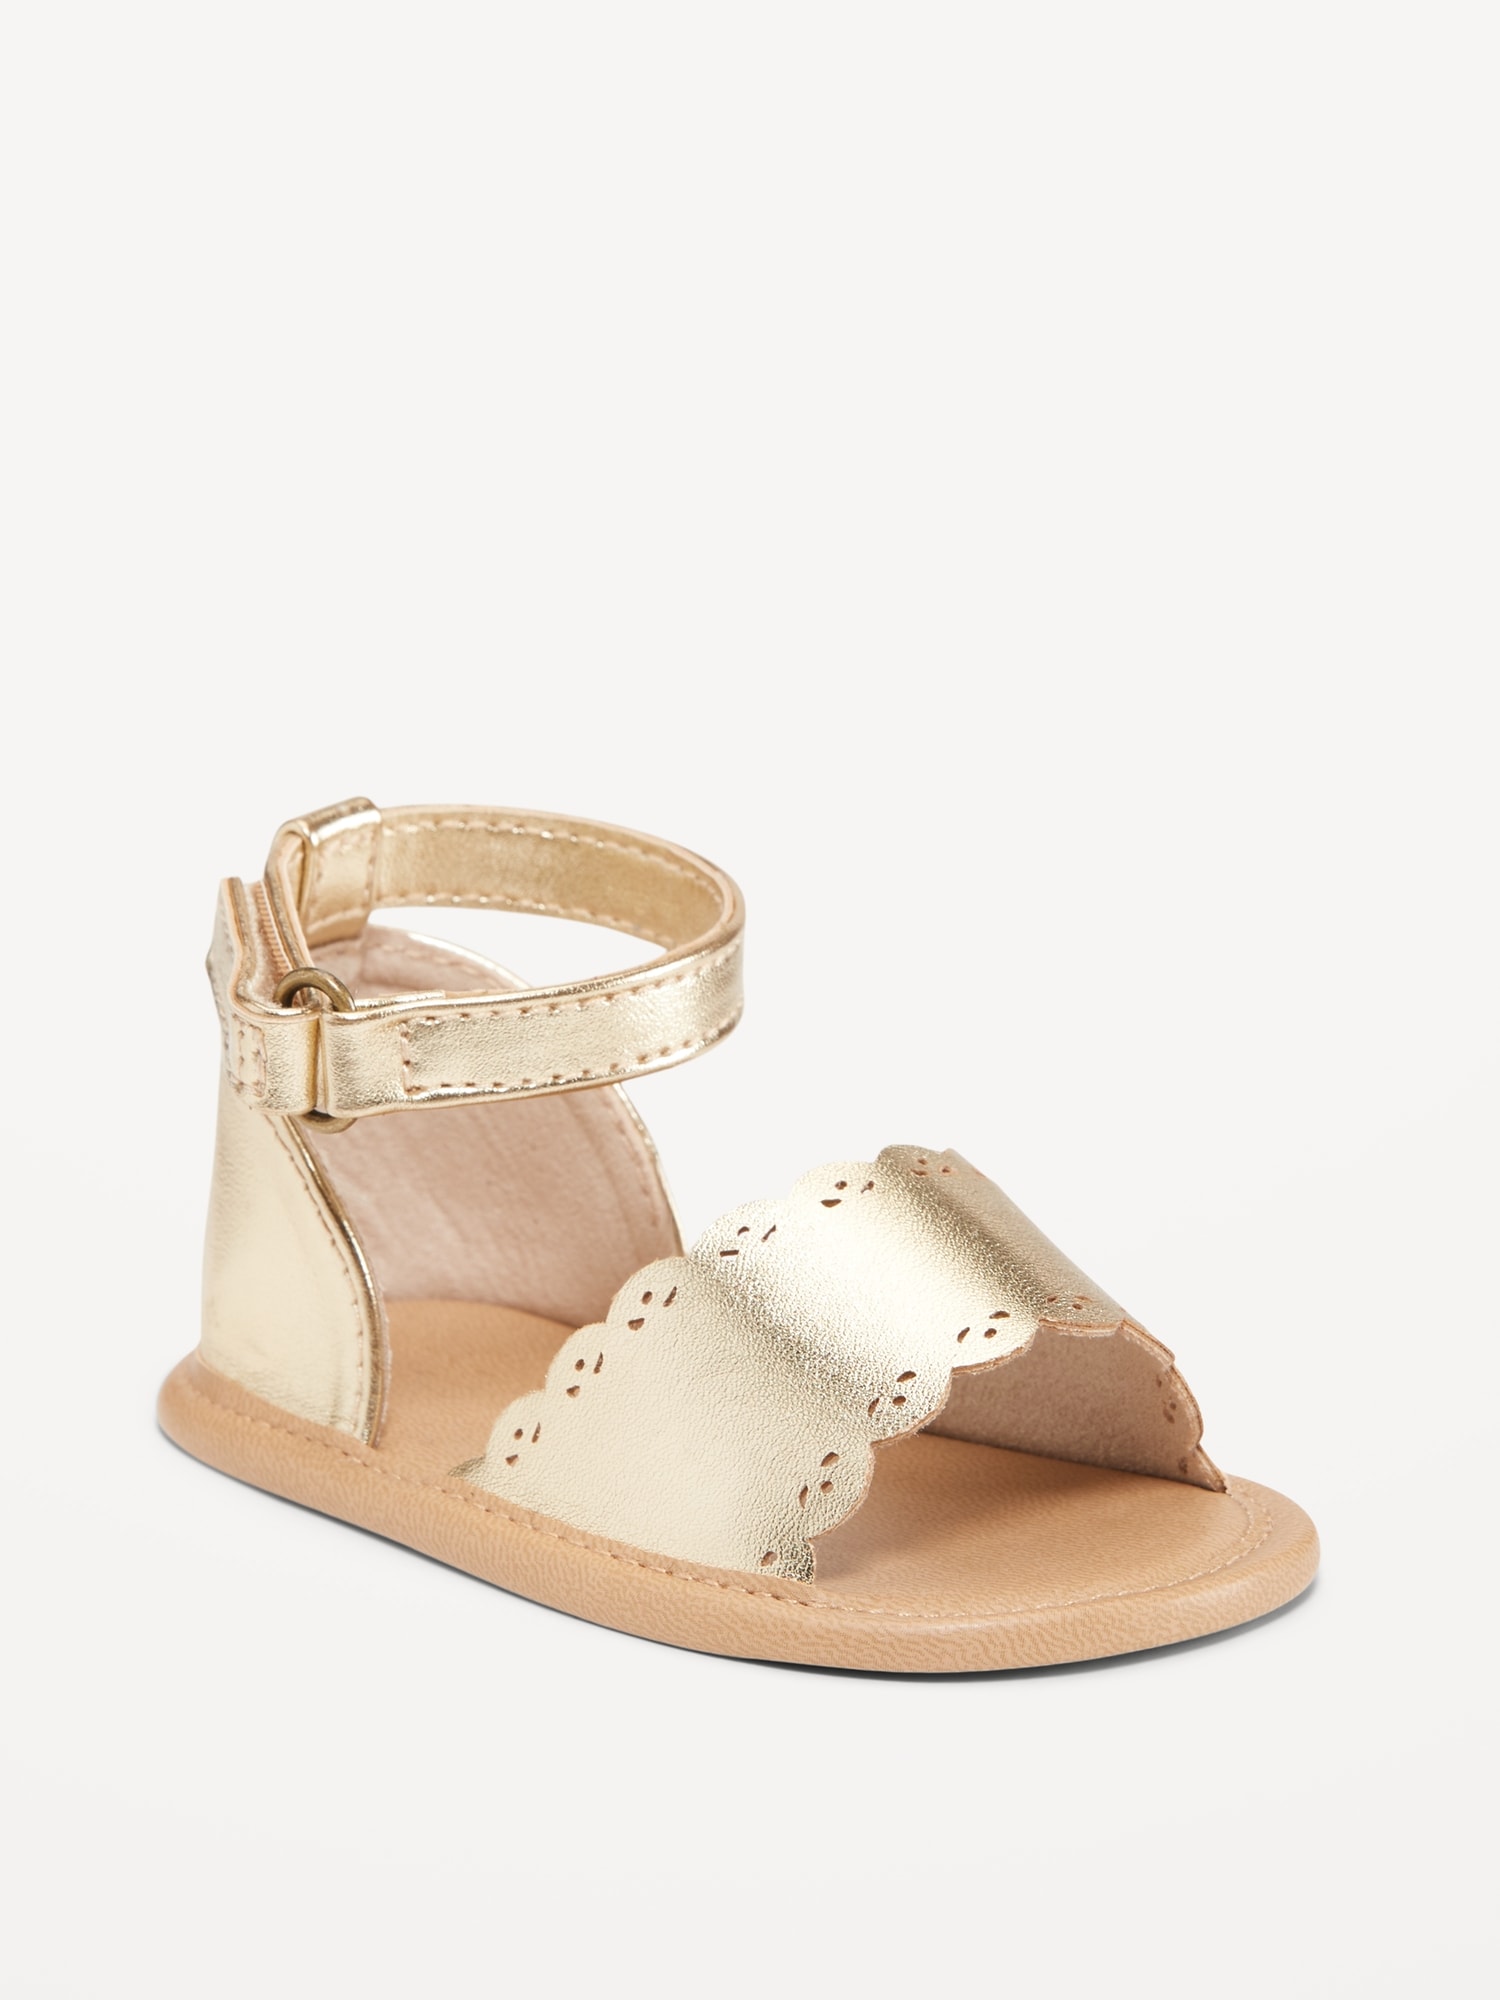 Metallic Faux-Leather Scallop-Trim Sandals for Baby